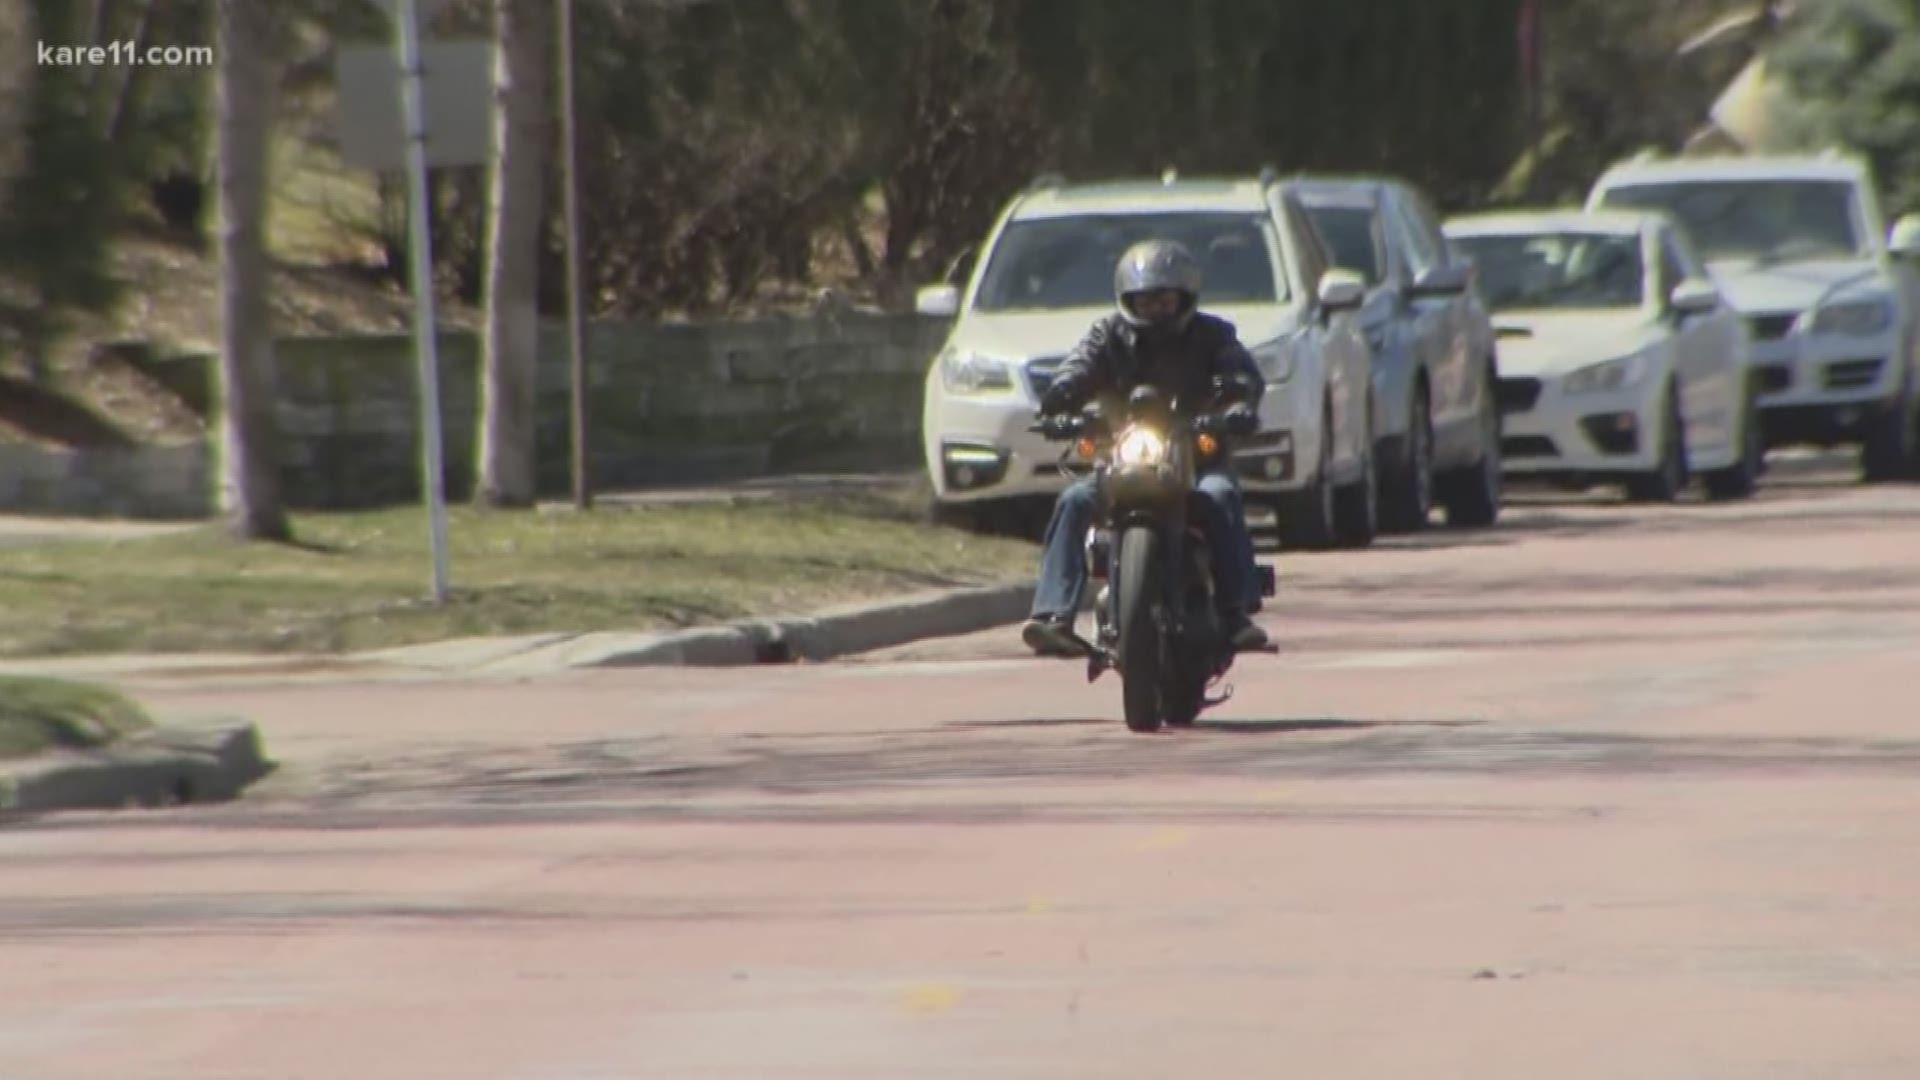 Now that the weather is getting nicer you're going to see more motorcycles on the roads that's why  Minnesota and Wisconsin are coming together to improve motorcycle safety